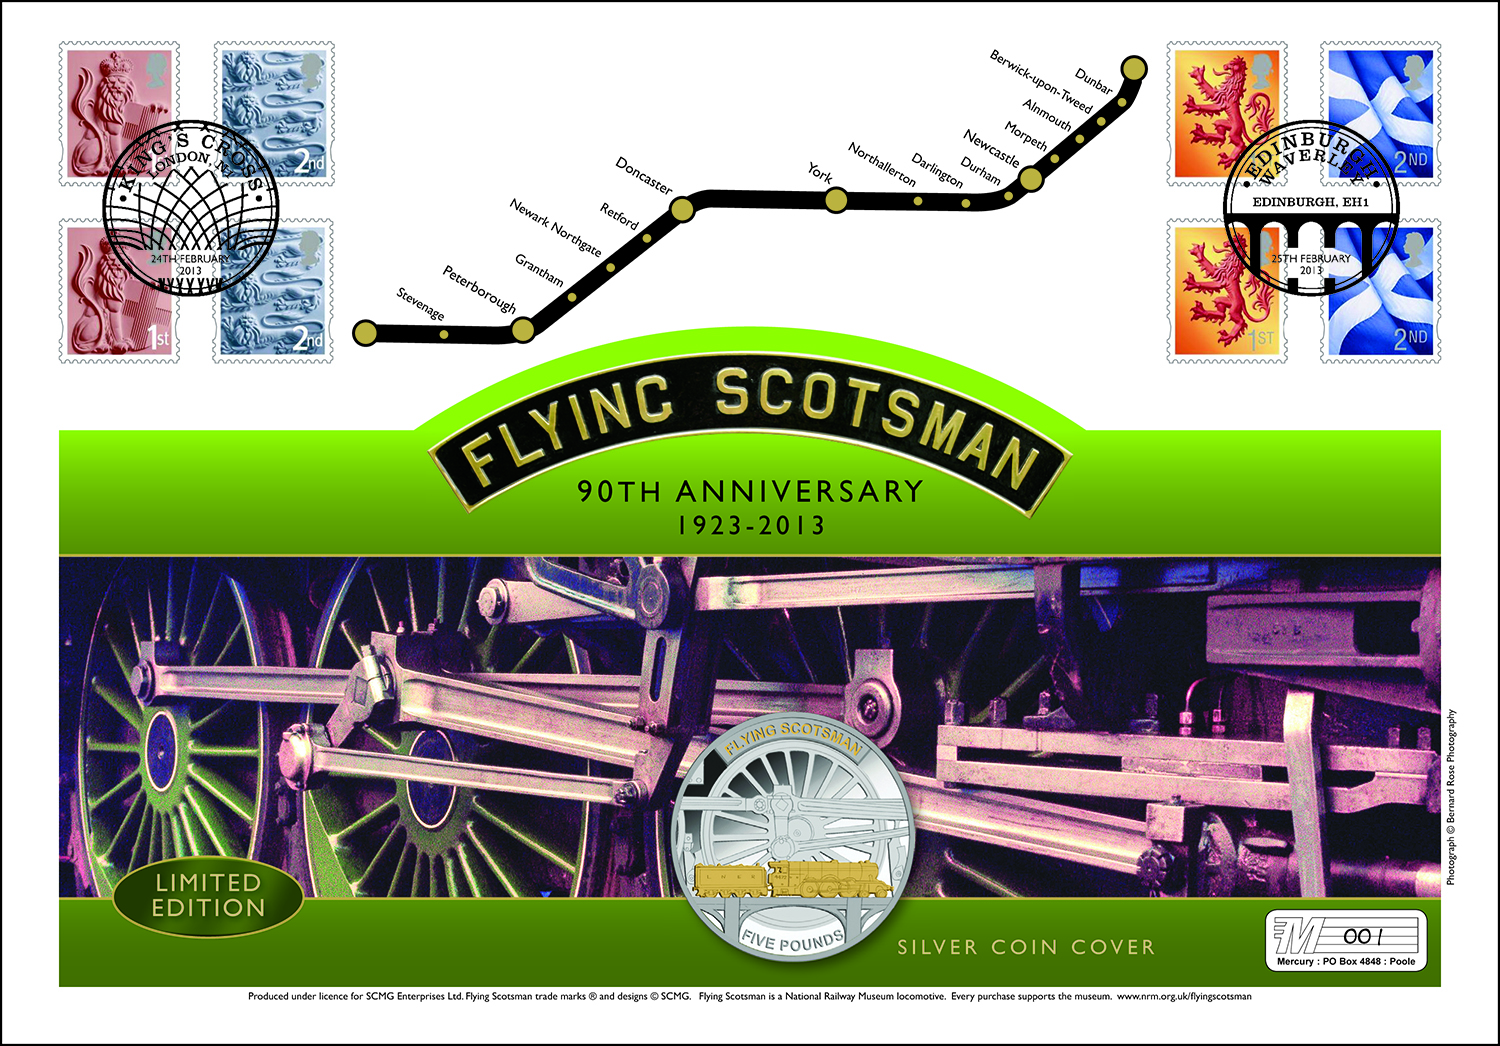 m544 lge flying scotsman c2a35 ag pnc6 1jk0122p - Re-tracing the Flying Scotsman's most famous journey